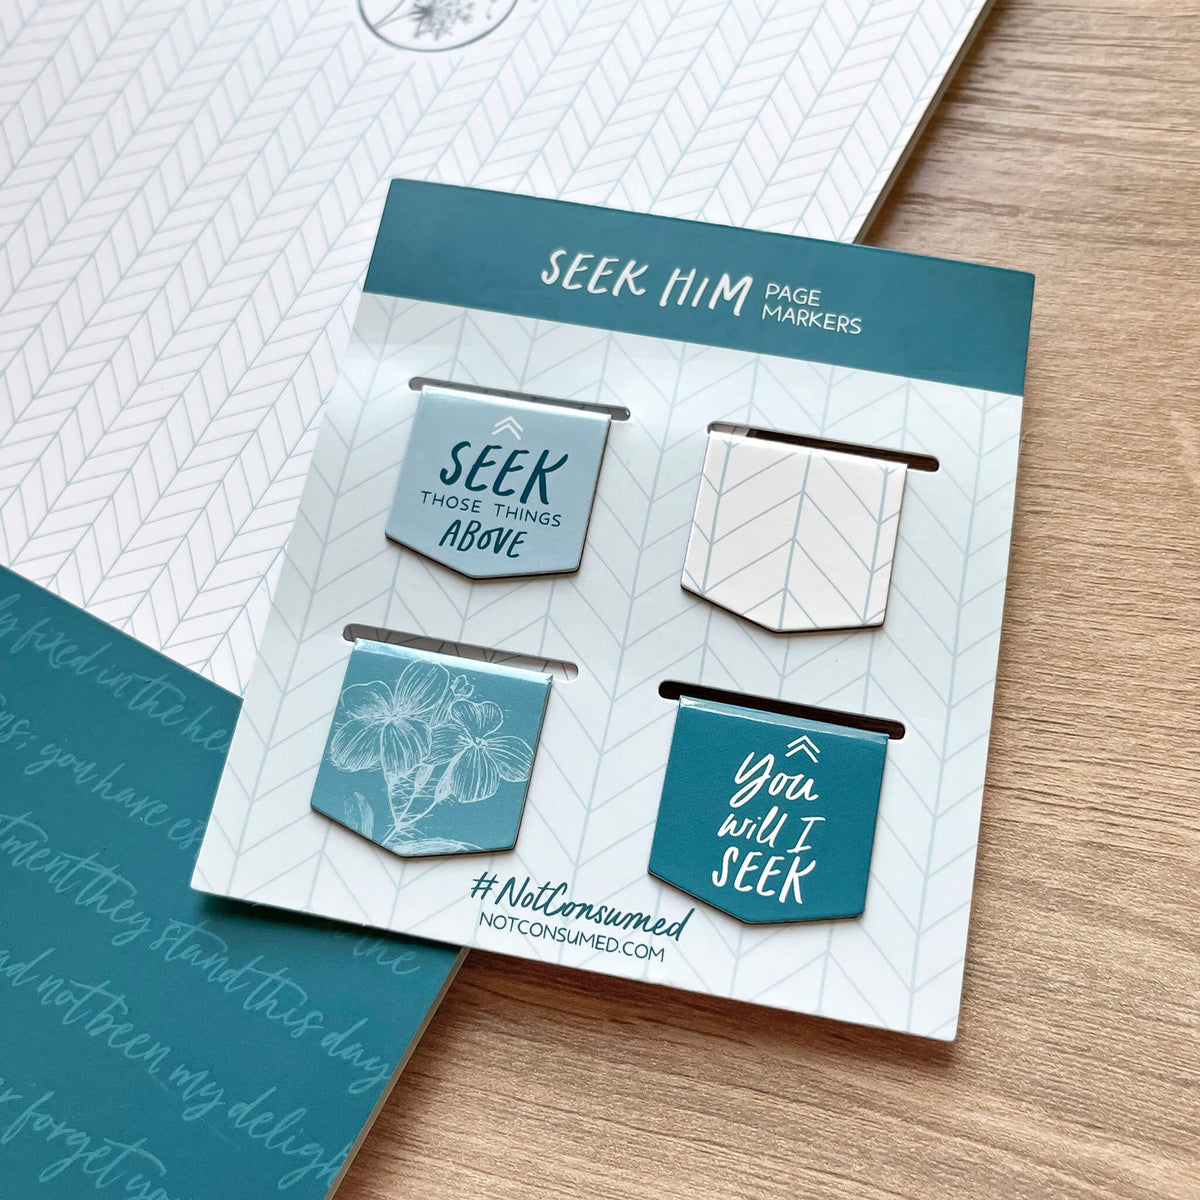 Seek Him Bible page markers bookmark